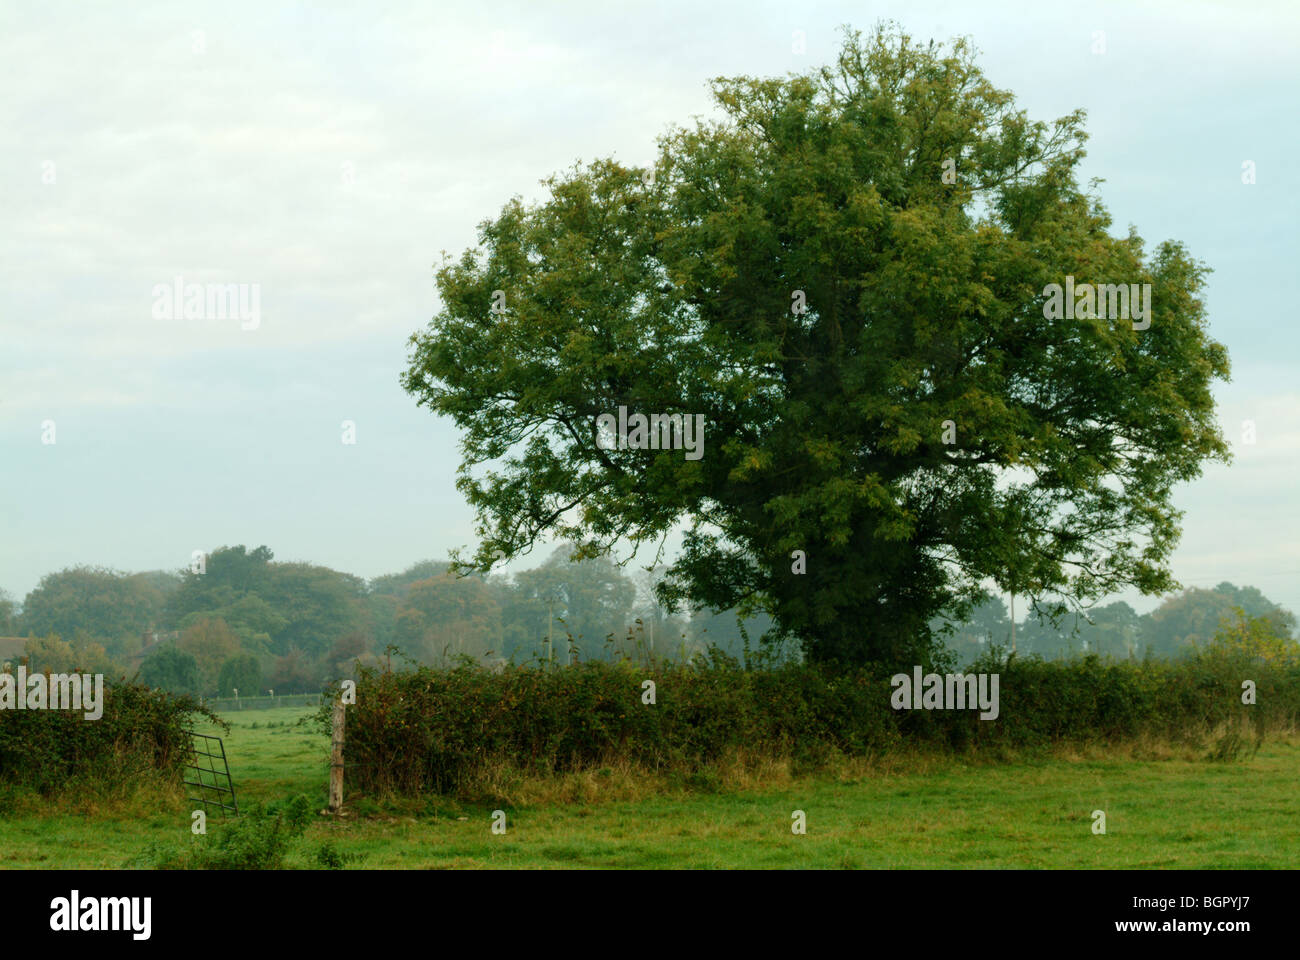 A lonely tree in the middle of a field next to a hedge Stock Photo